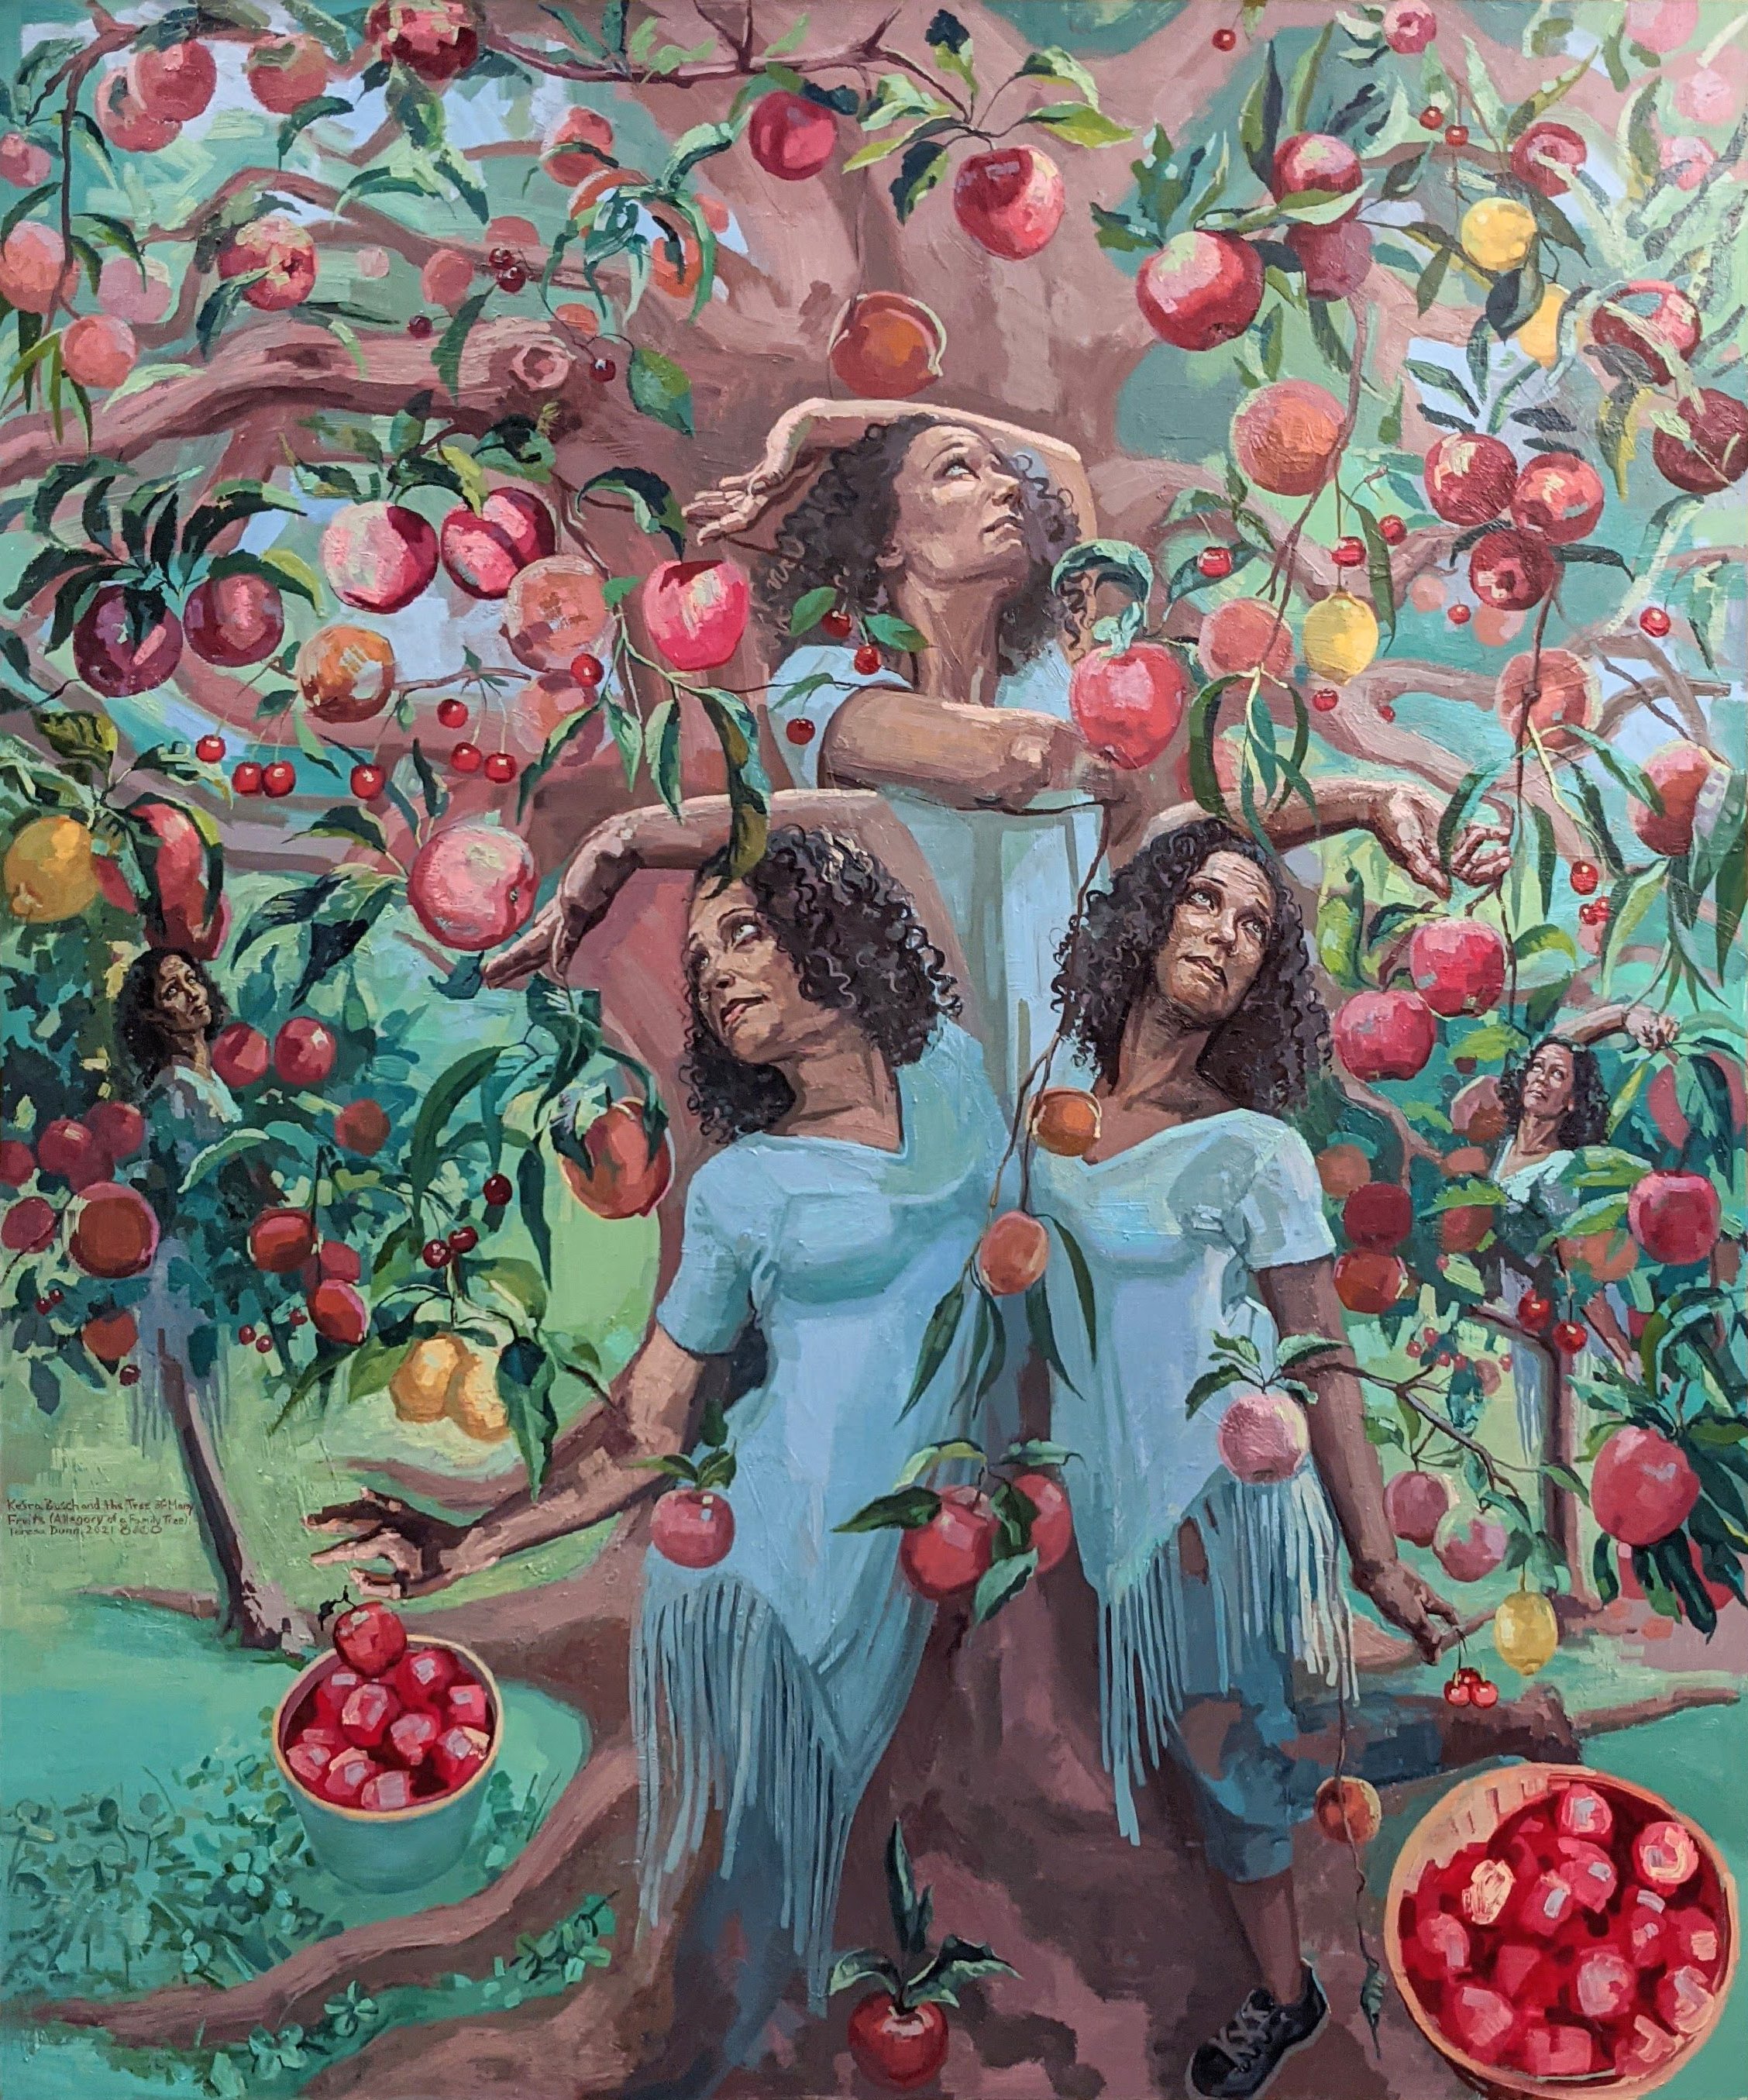 00Teresa Dunn_Keira Busch and the Tree of Many Fruits_2021_Oil on Linen_72x60 inches.jpg